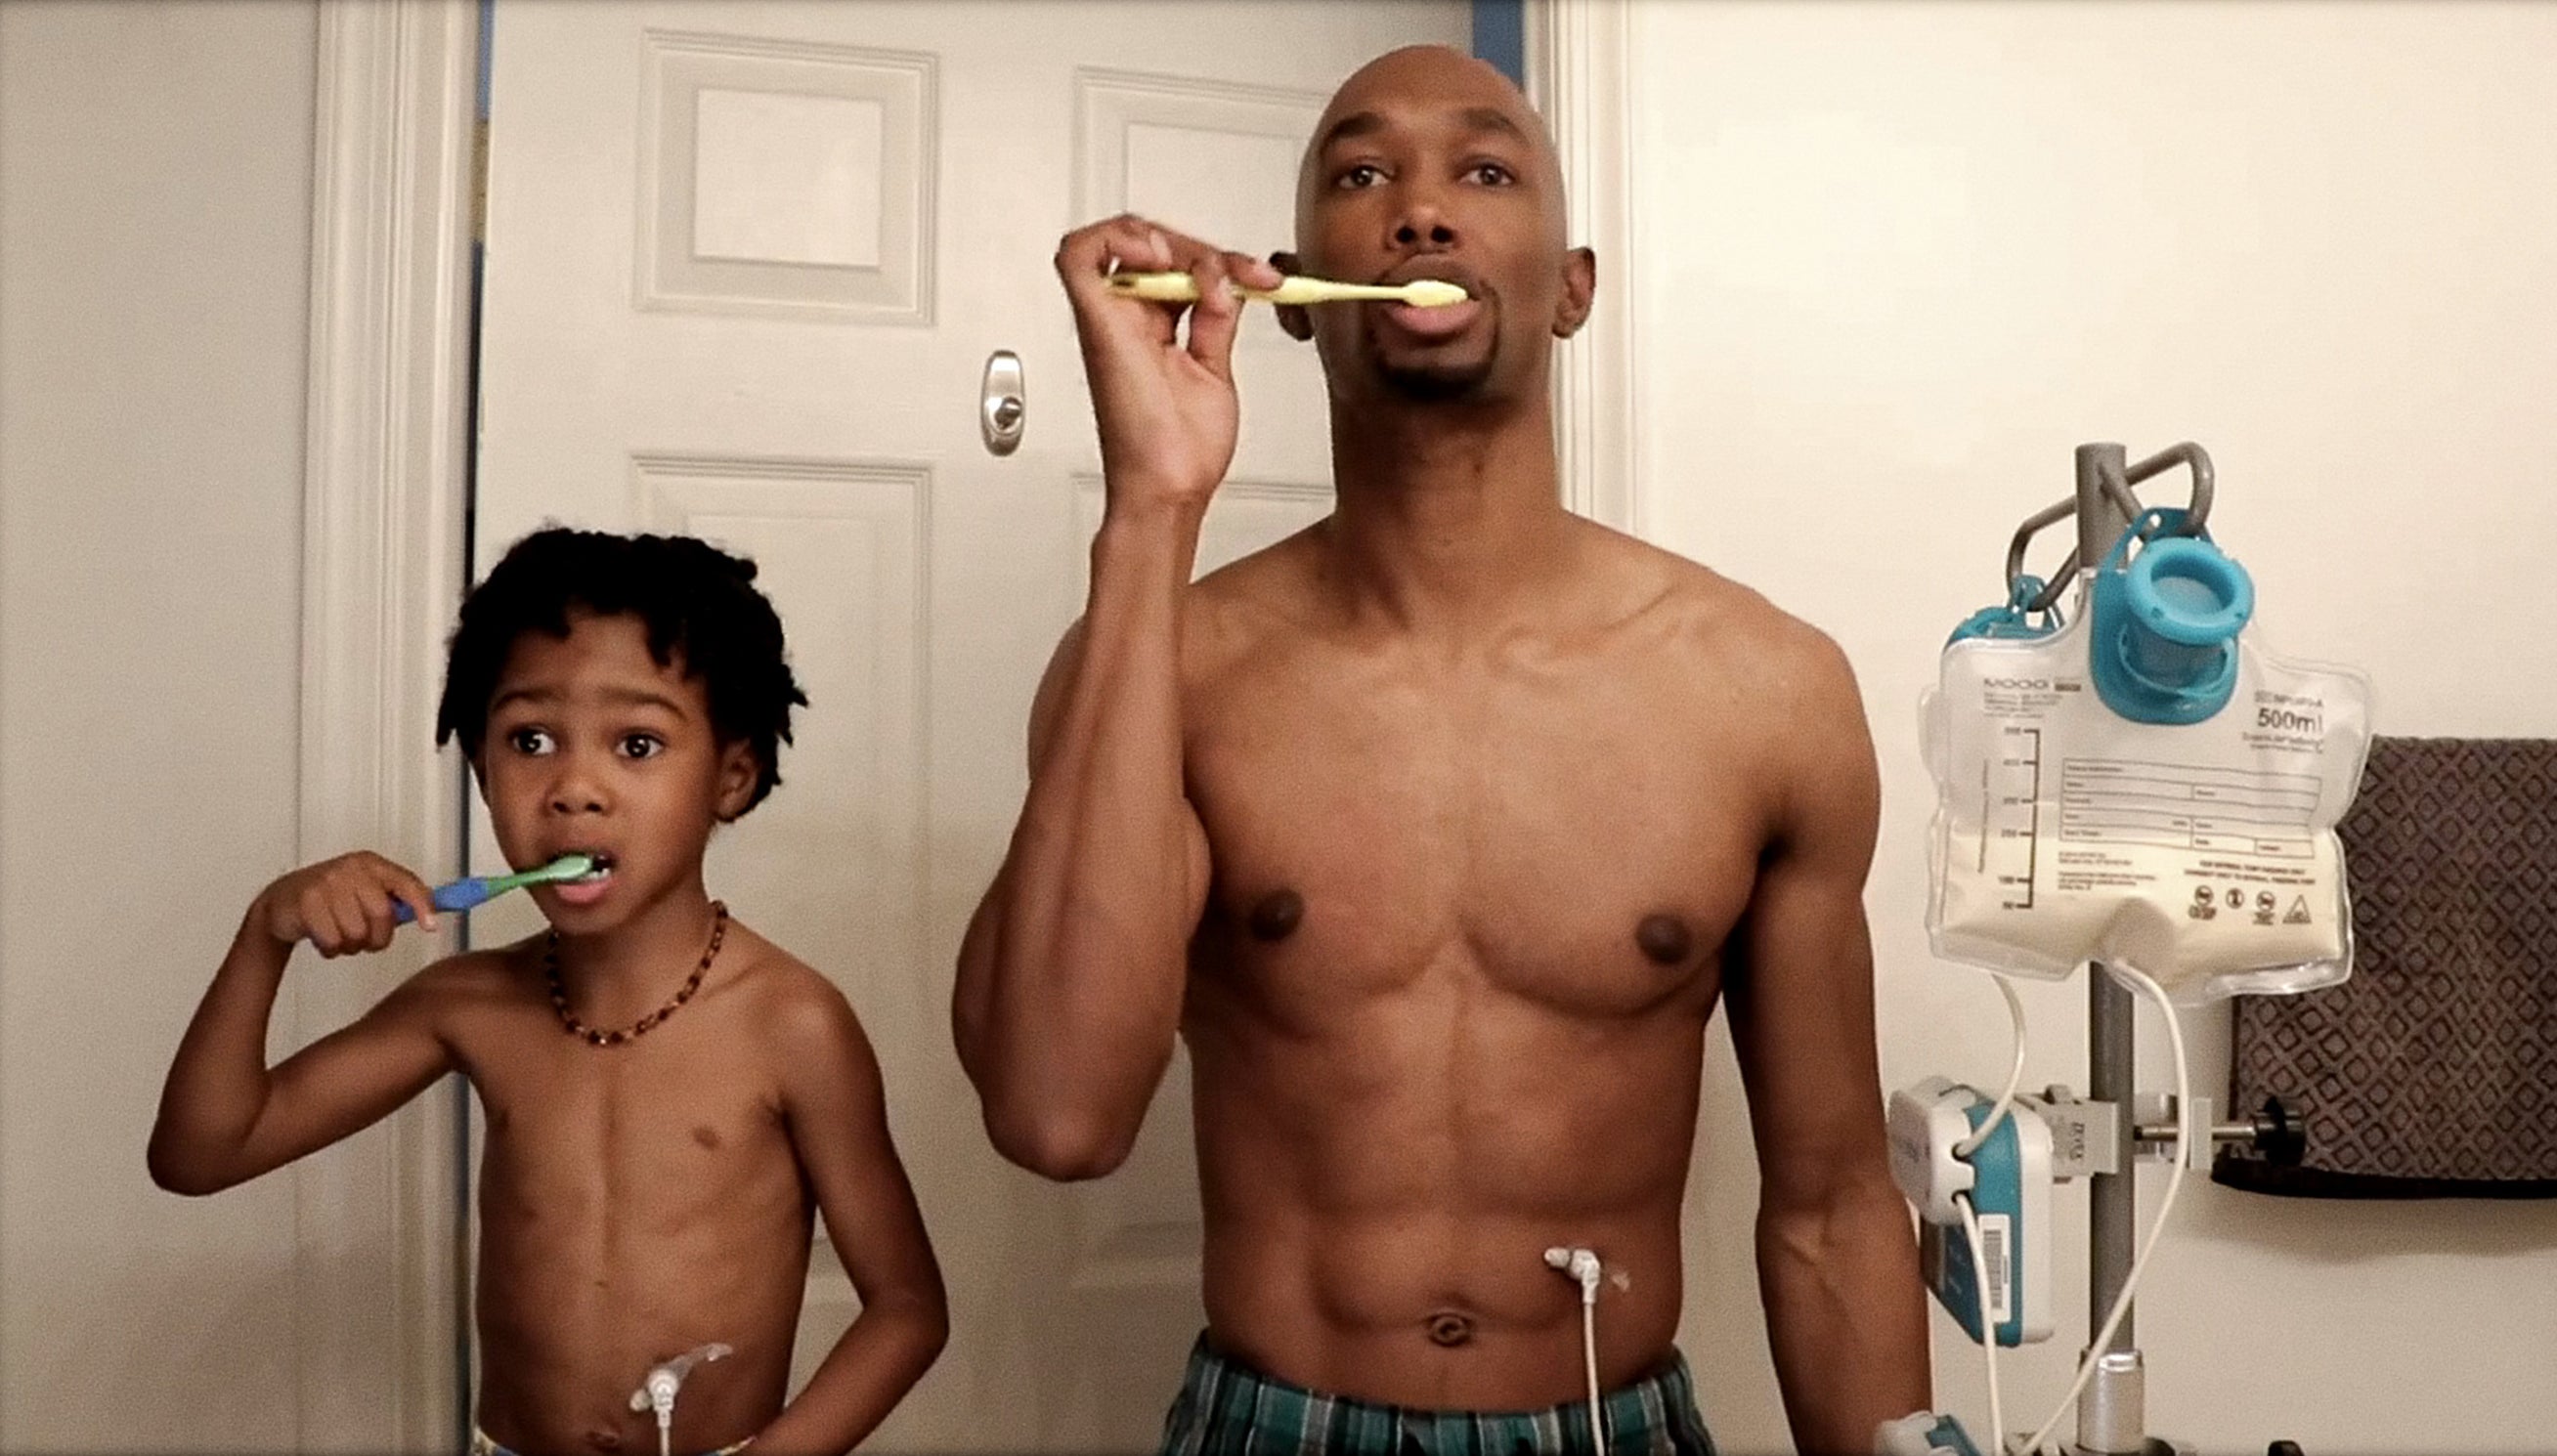 A father and son brushing their teeth.